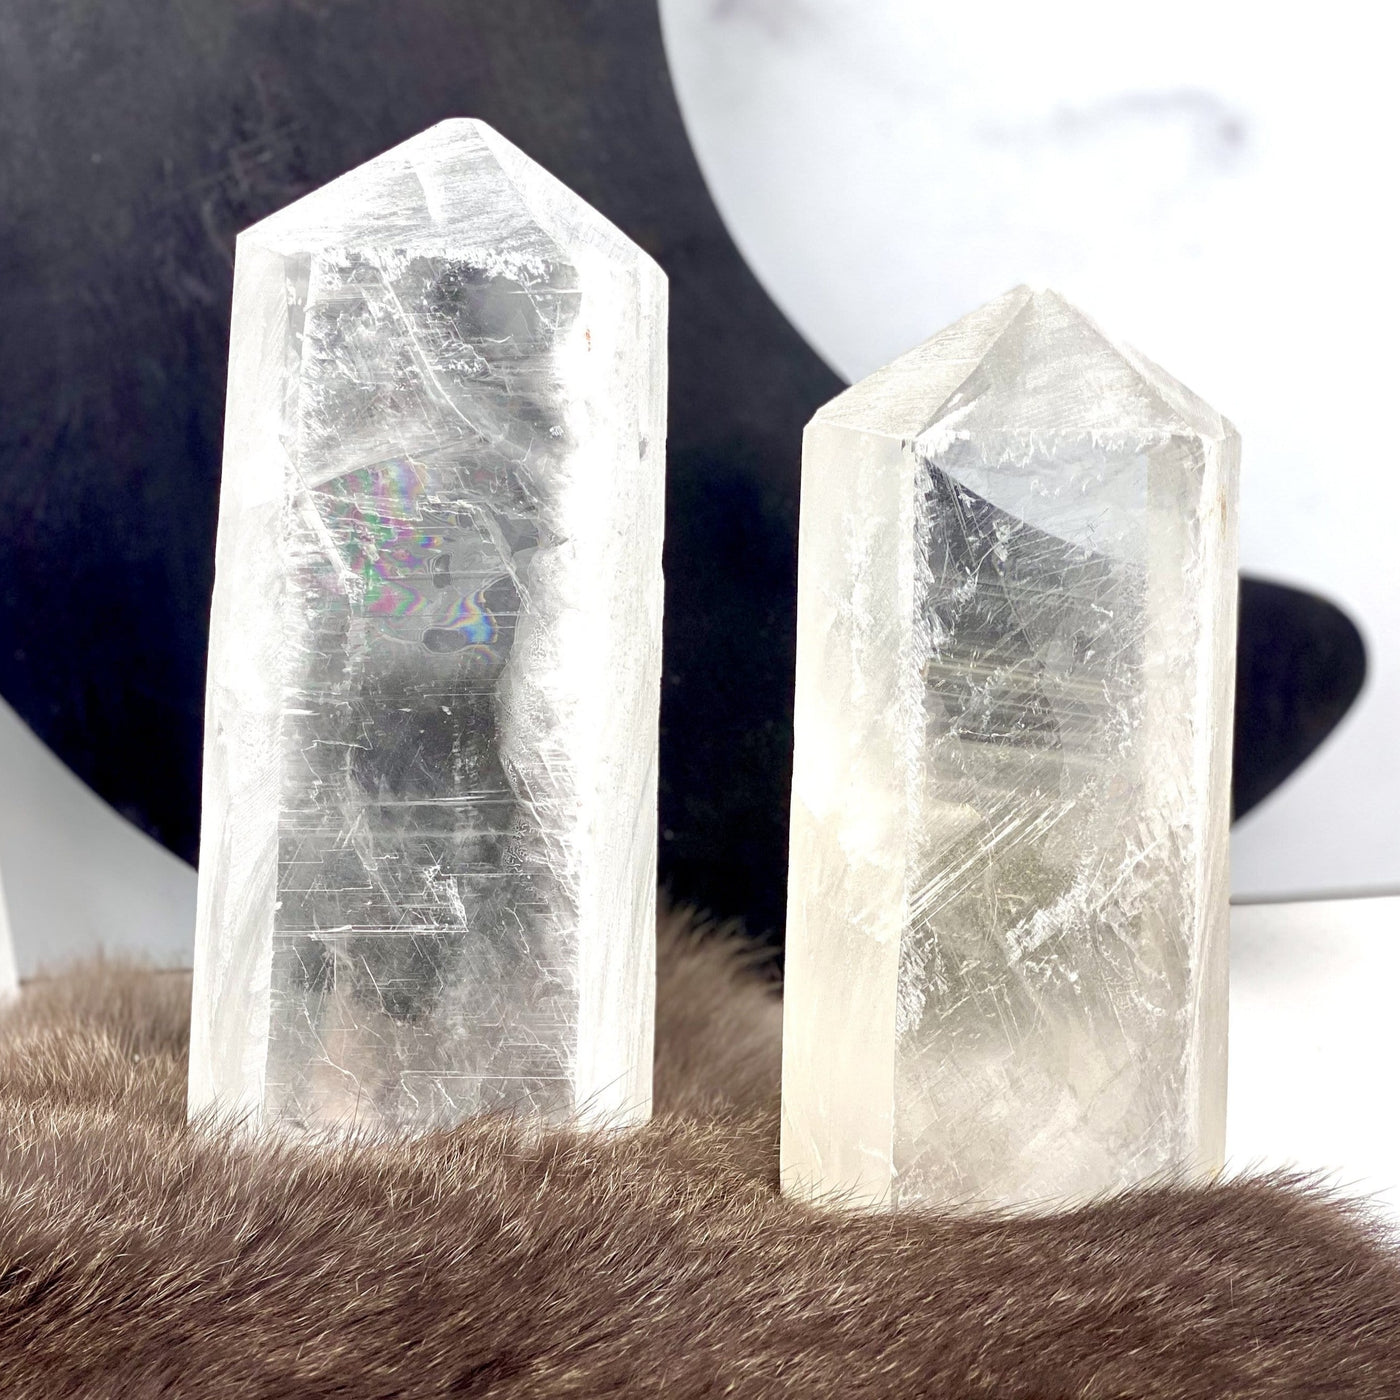 3 Polished Selenite Semi-Polished Points showing size differences